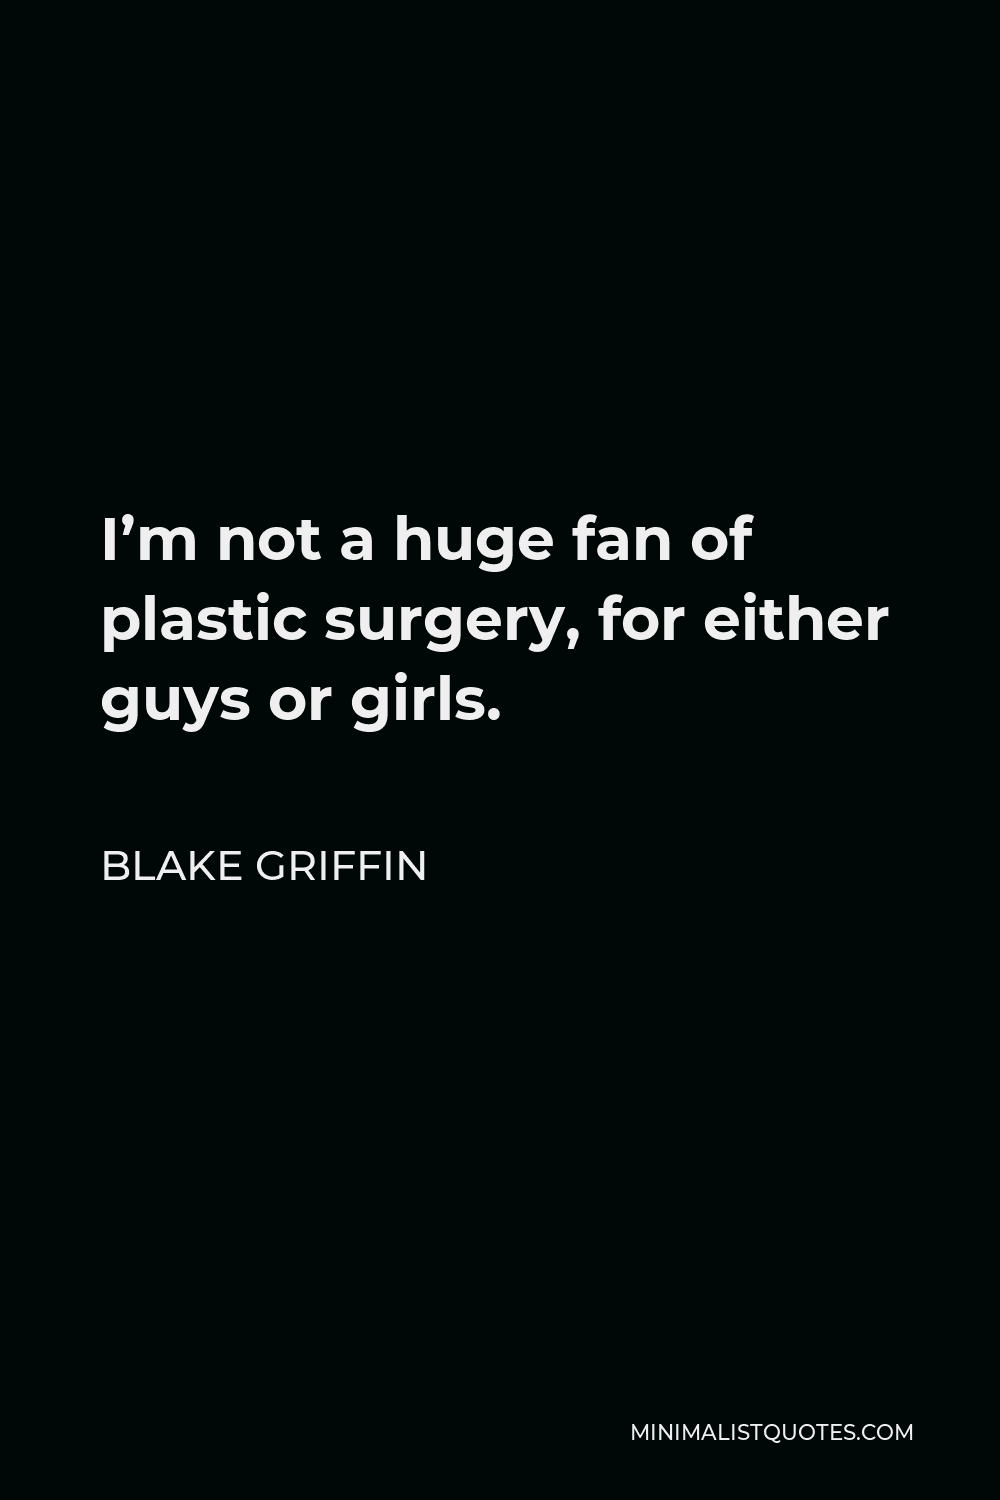 Blake Griffin Quote - I’m not a huge fan of plastic surgery, for either guys or girls.